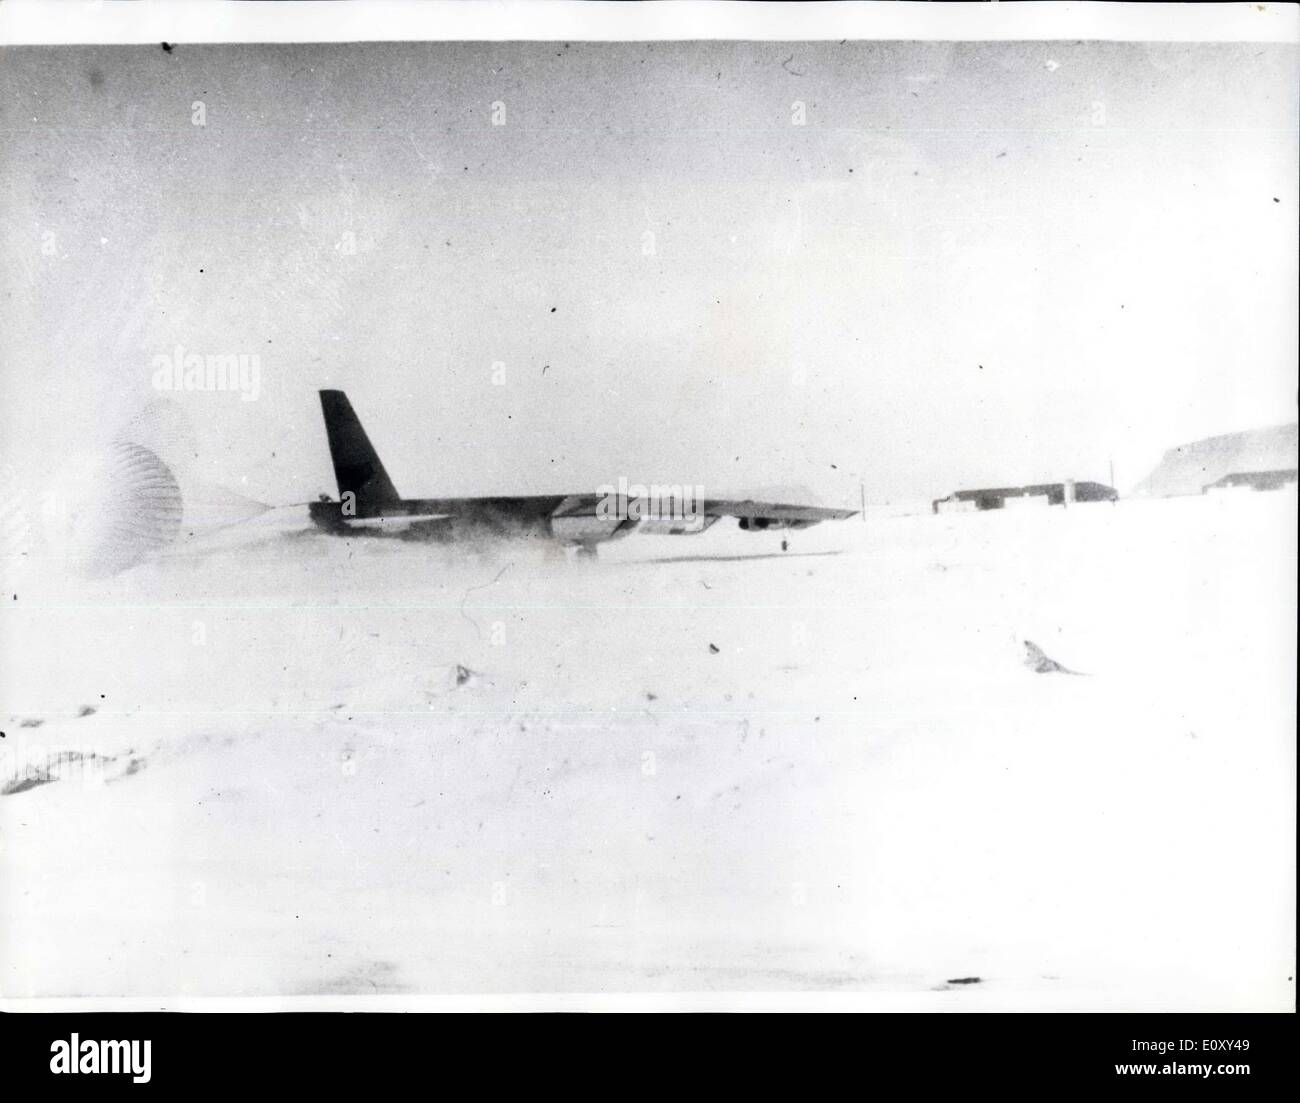 Jan. 23, 1968 - Search for H-Bombs after American Bomber crashed in Greenland: A search is being carried out by American Air Force teams for four hydrogen bombs aboard a U.S bomber which crashed into ice-covered sea when attenpting an emergency landing. The plane, a B-52 bomber, crashed yesterday in Greenland's North Star Bay-seven miles from the American Air Force base at Thule. A statement said the B-52 bomber's nuclear weapons were unarmed ad there was no danger of a nuclear explosion Stock Photo